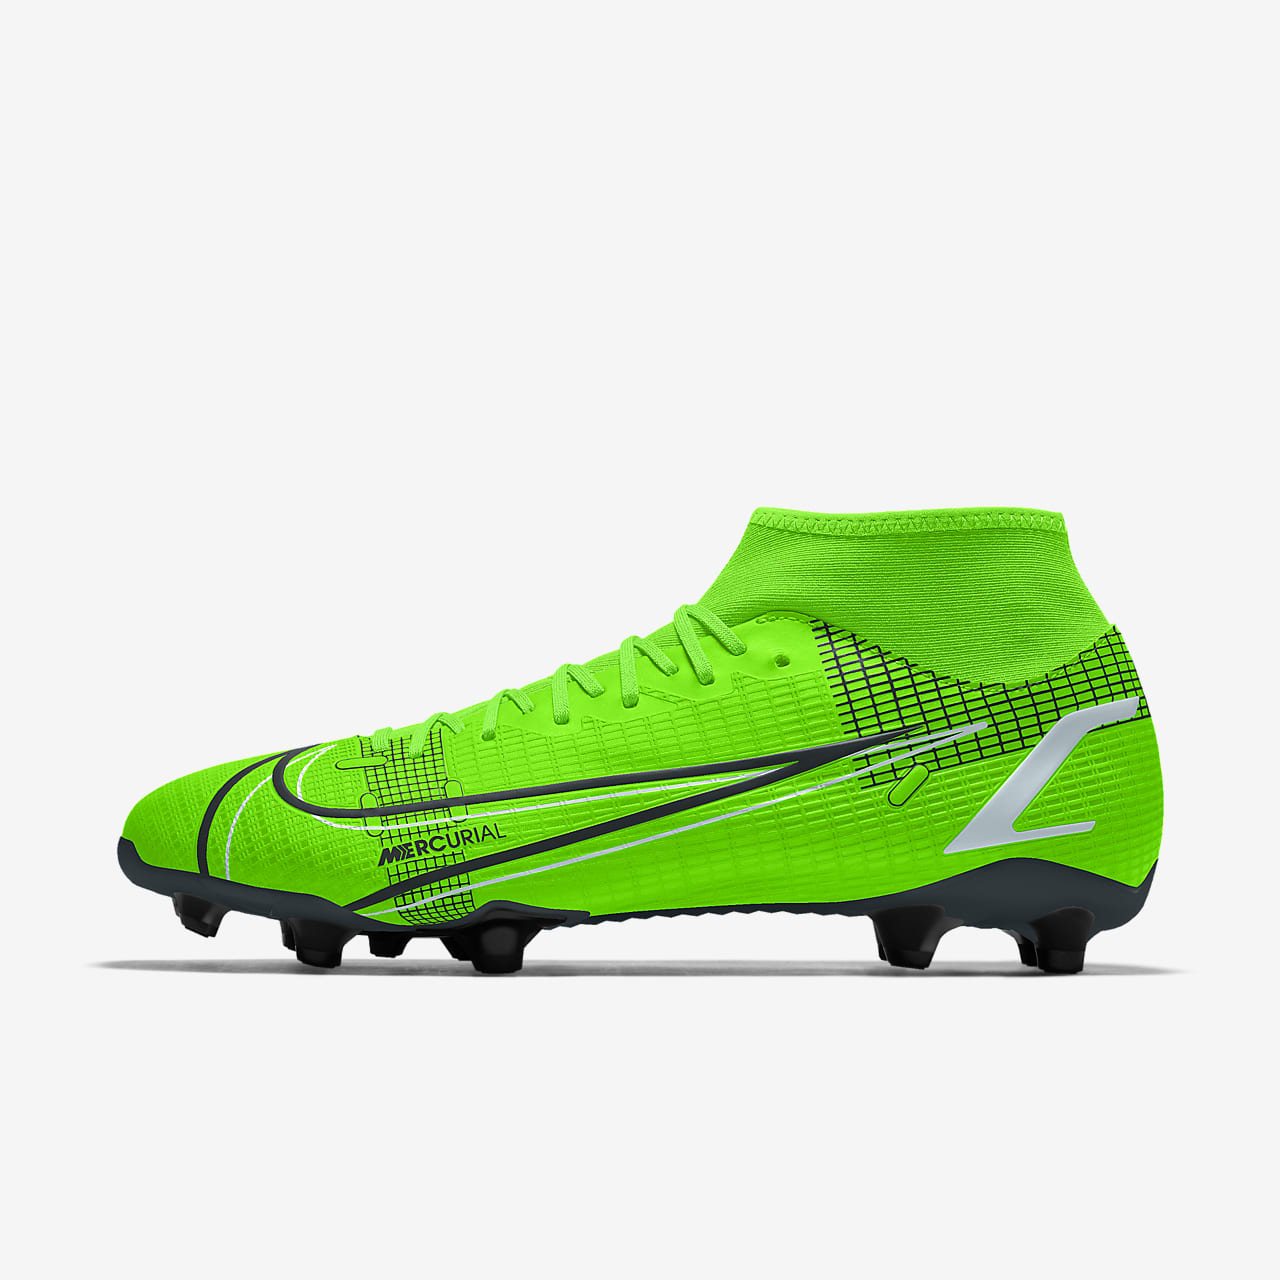 Chaussure de football à crampons personnalisable Nike Mercurial Superfly 8 Academy By You